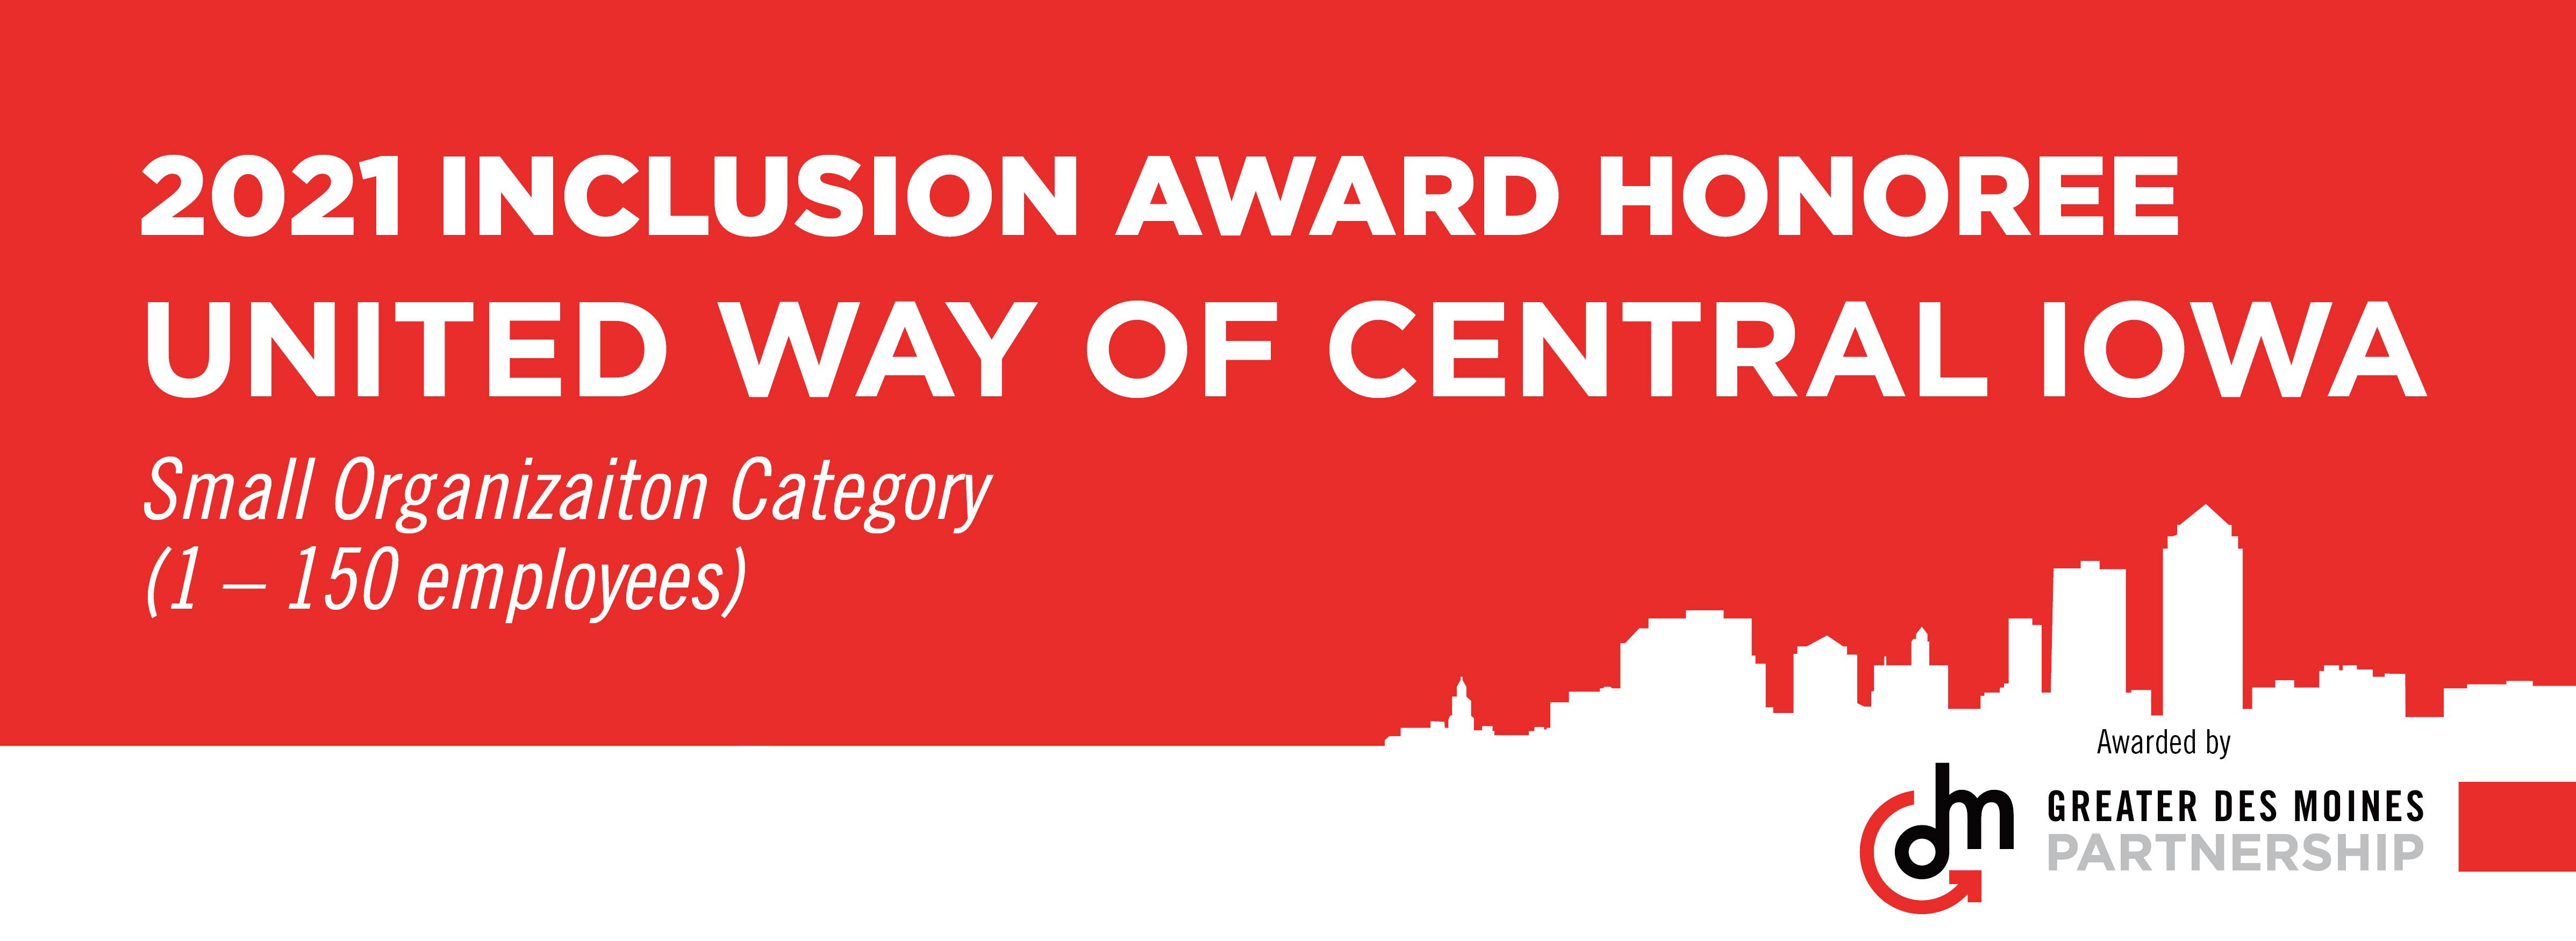 United Way of Central Iowa Inclusion Award